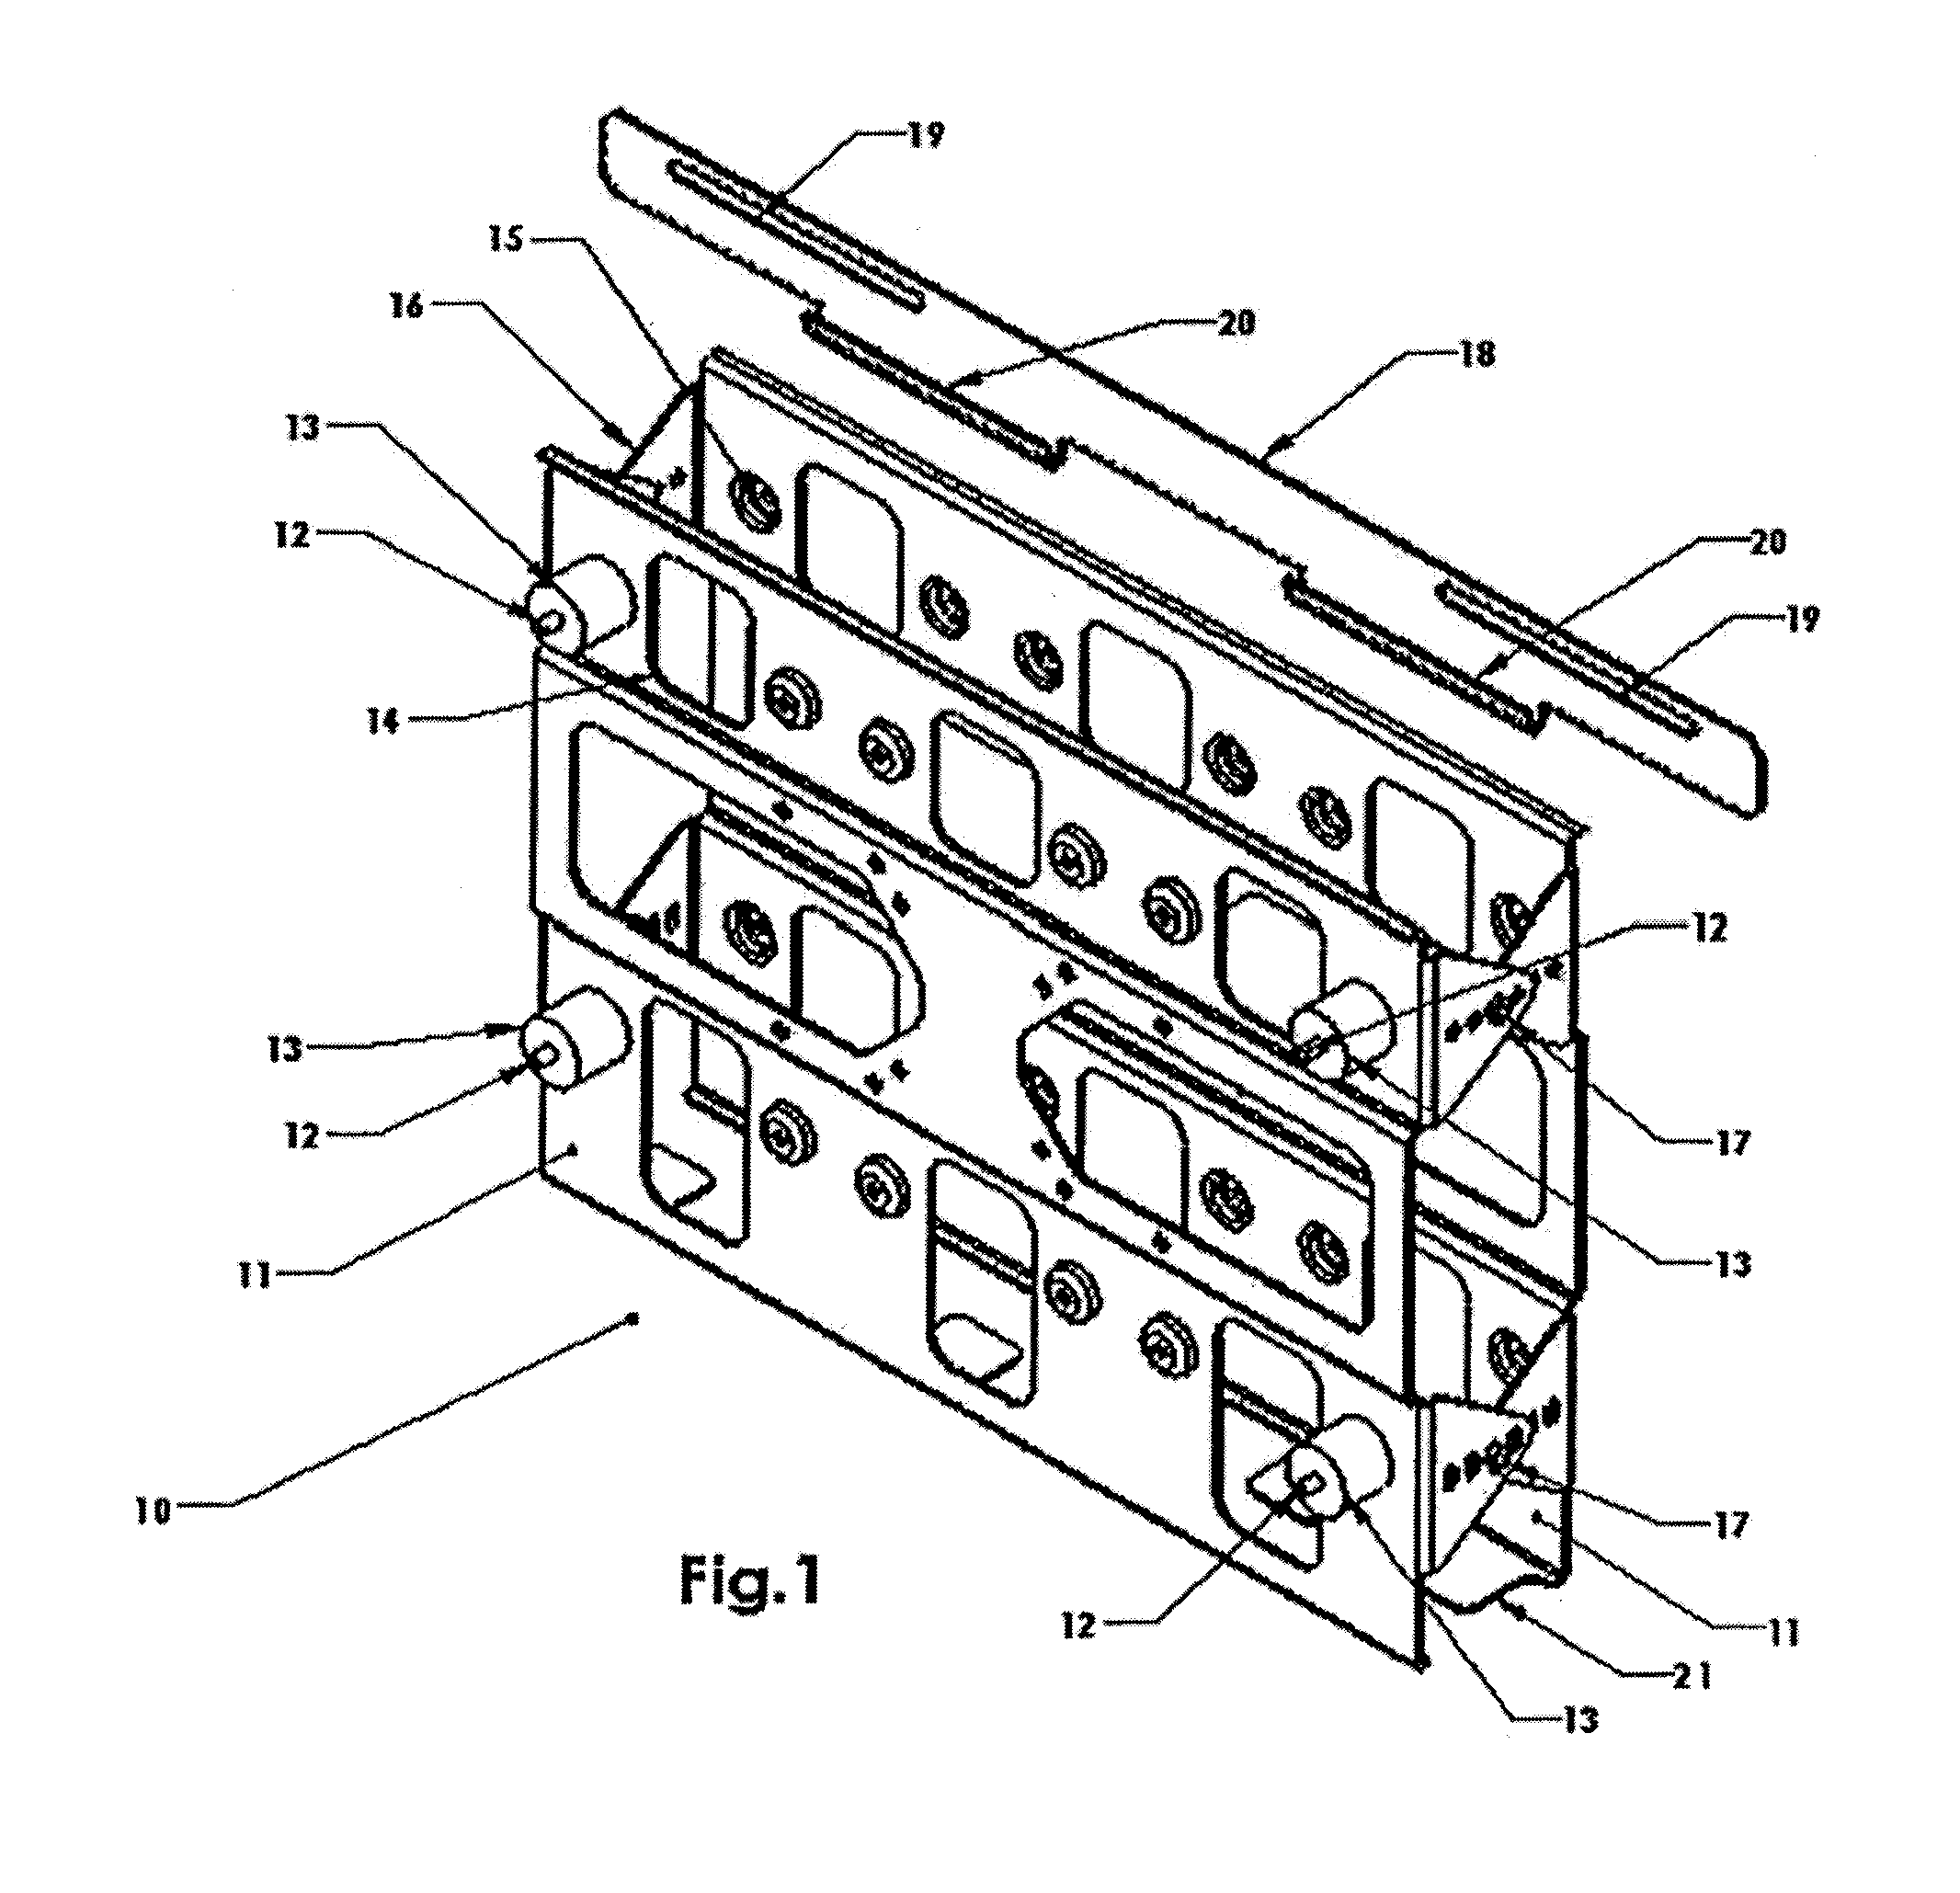 Method and device for wall mounting flat panel monitor and storing associated audio/video components